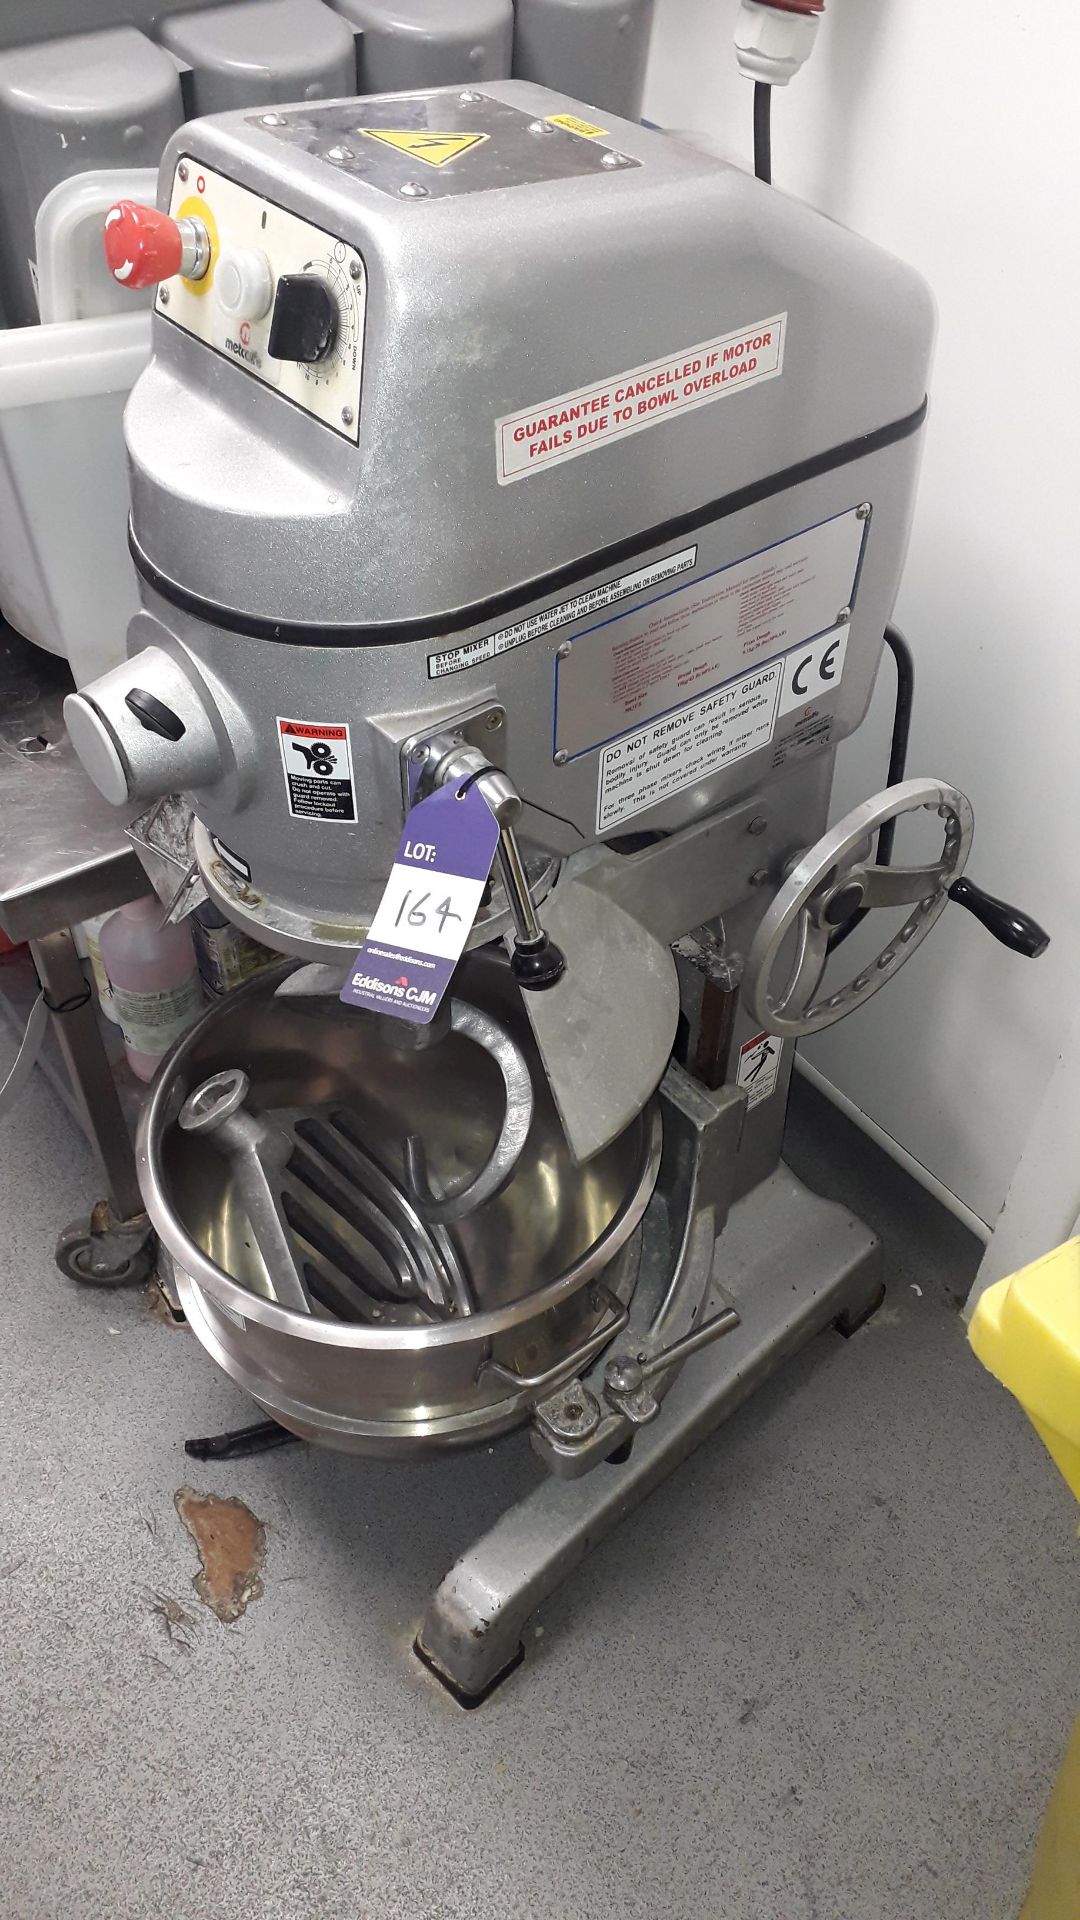 Metcalfe Stainless Steel 30Ltr Heavy Duty Spiral Dough Mixer Serial Number SP30HI/160887/GS 415v, - Image 2 of 6